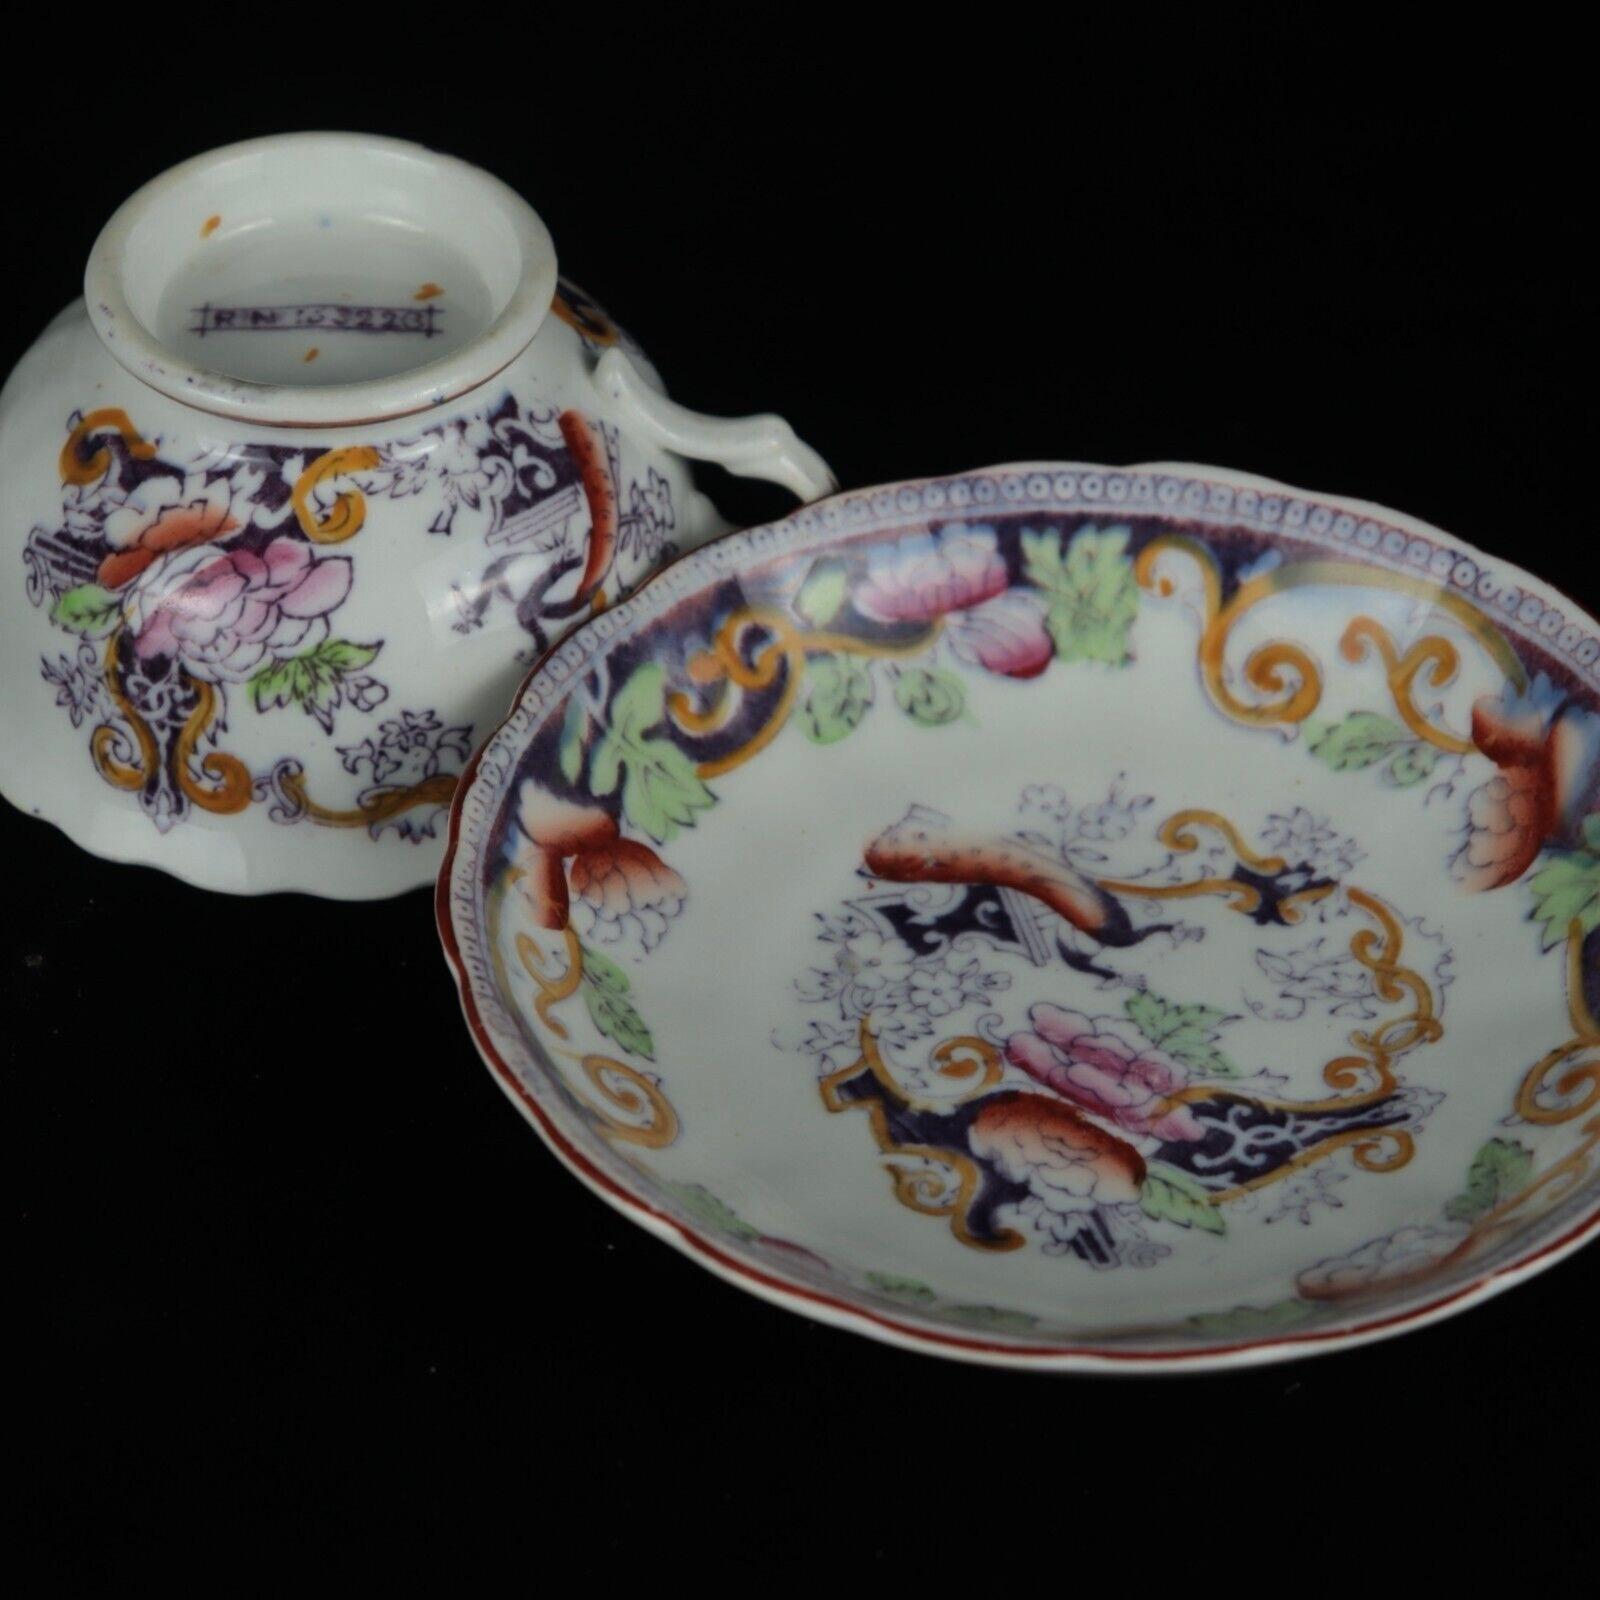 Porcelain Pair of Antique 1890 English Bone China Tea Cup and Saucer Sets For Sale